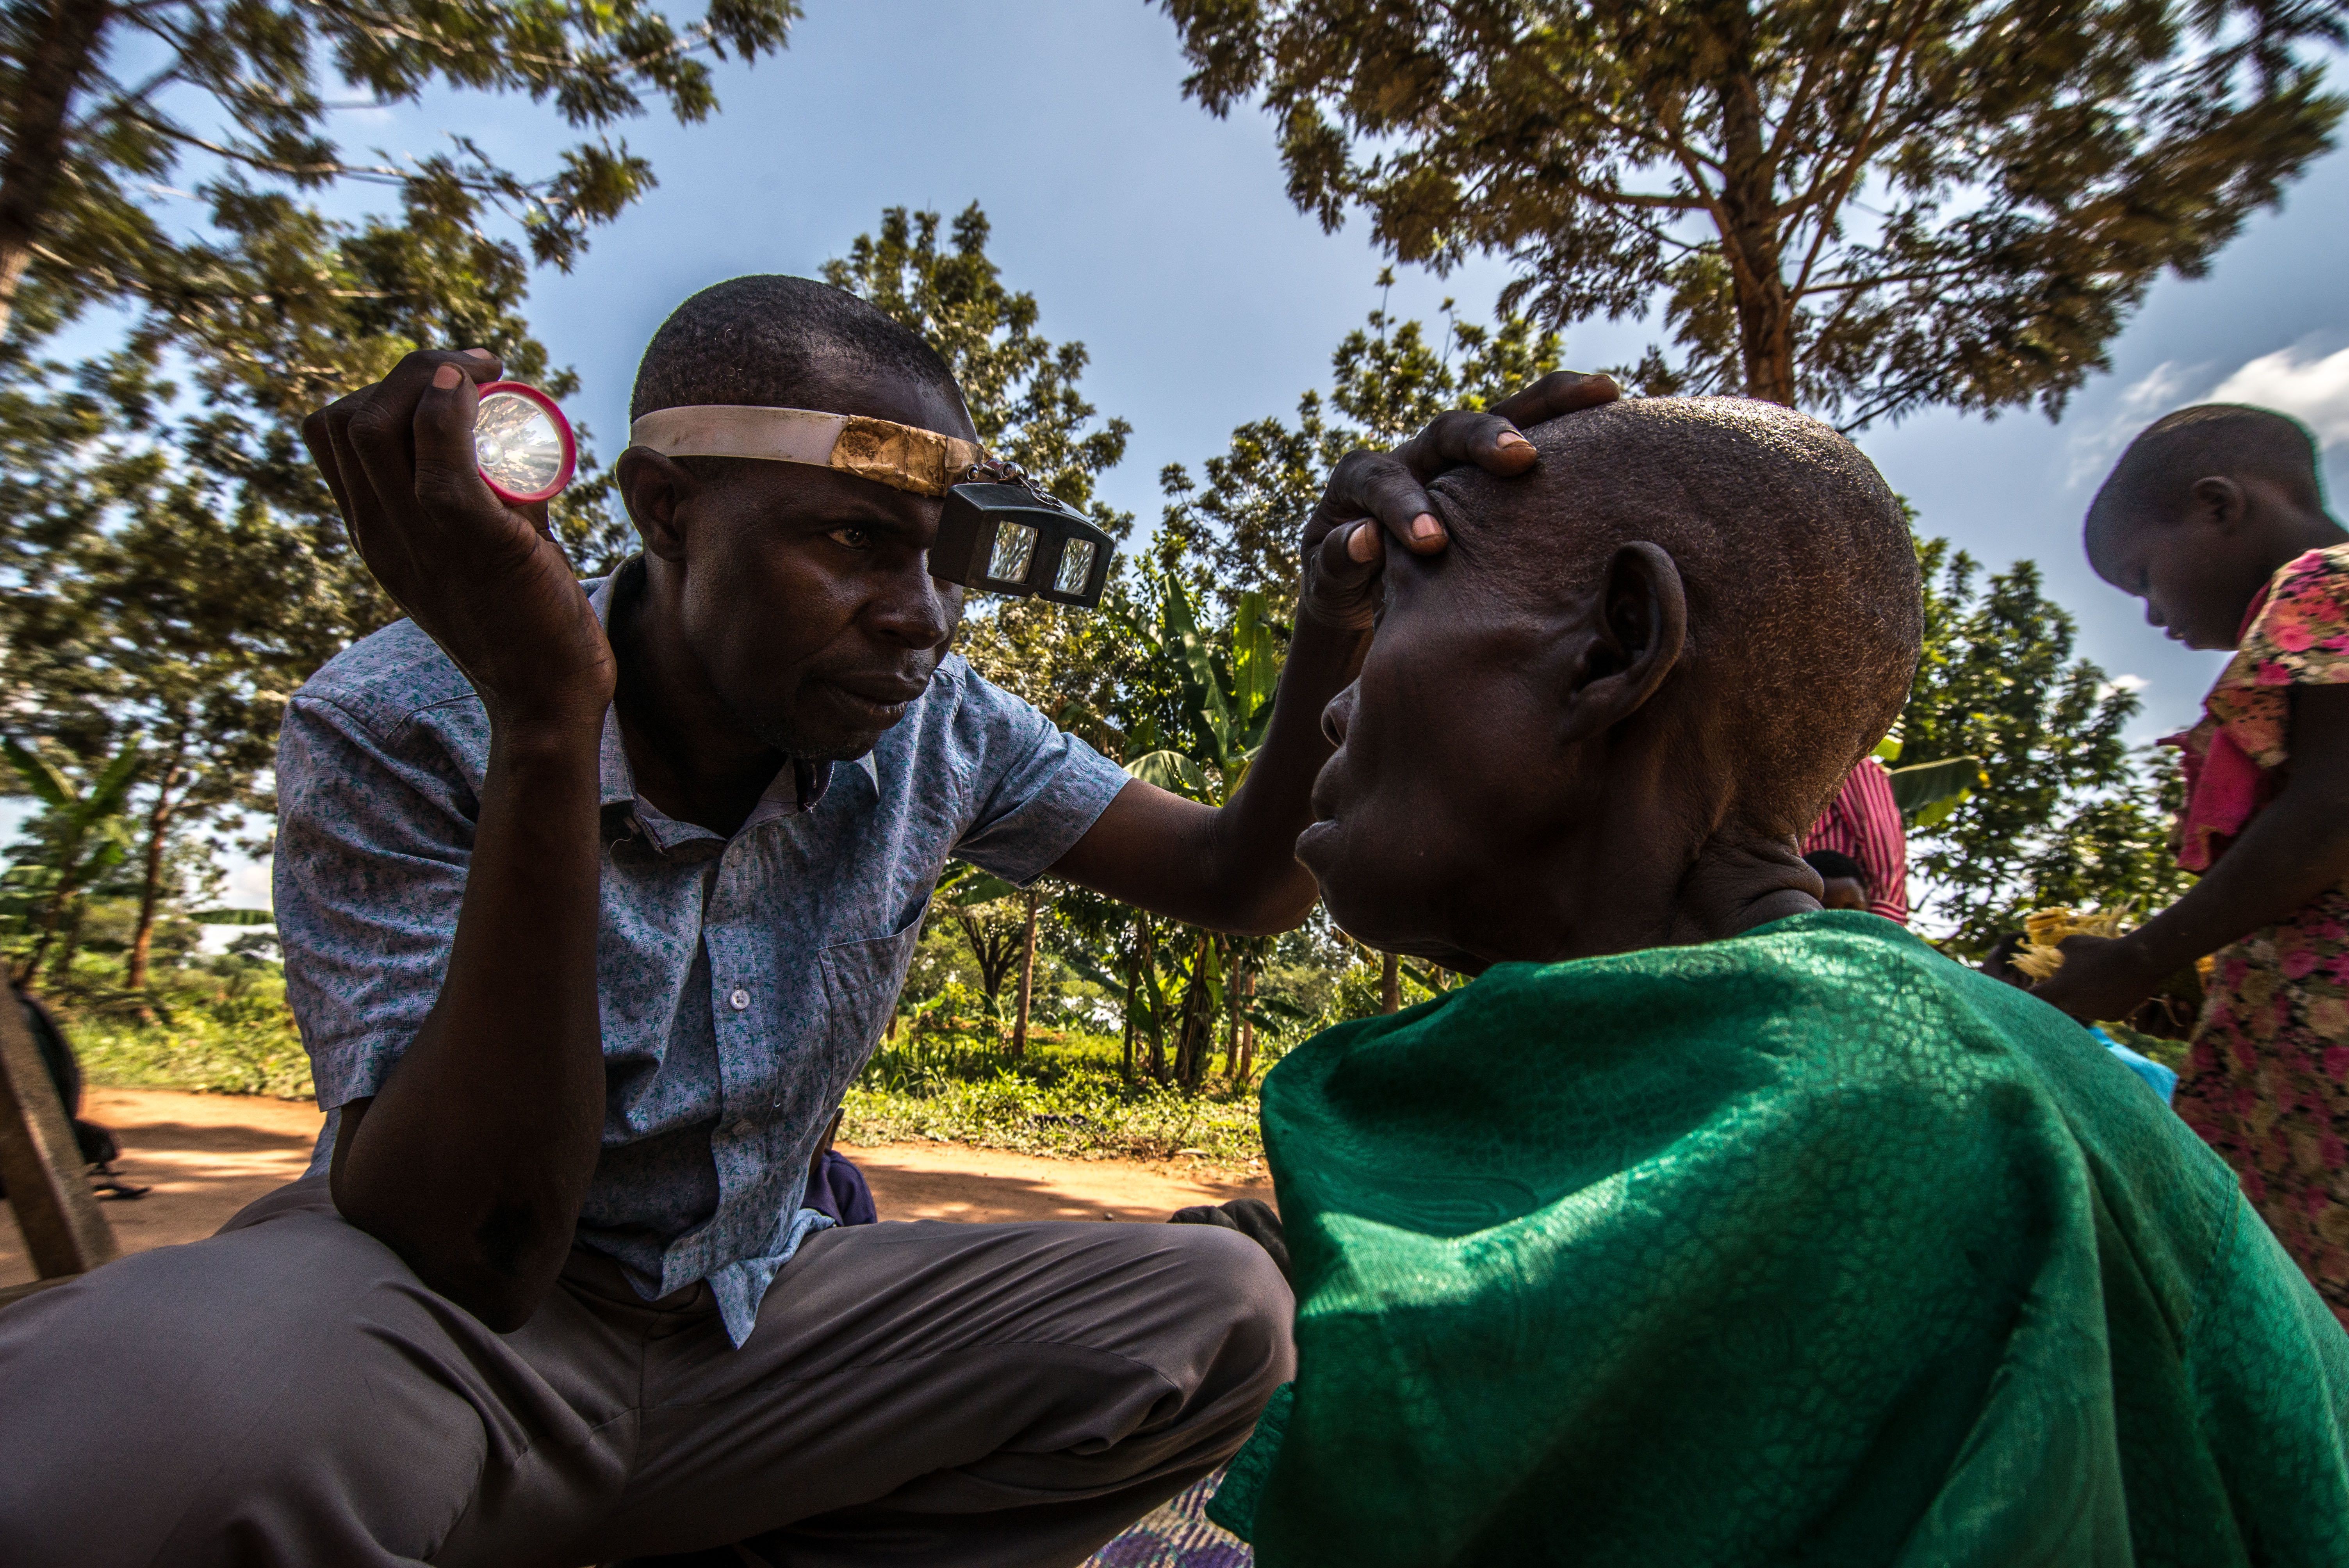 This photo shows a Ugandan man inspecting an old Ugandan woman's eyes in a field. 